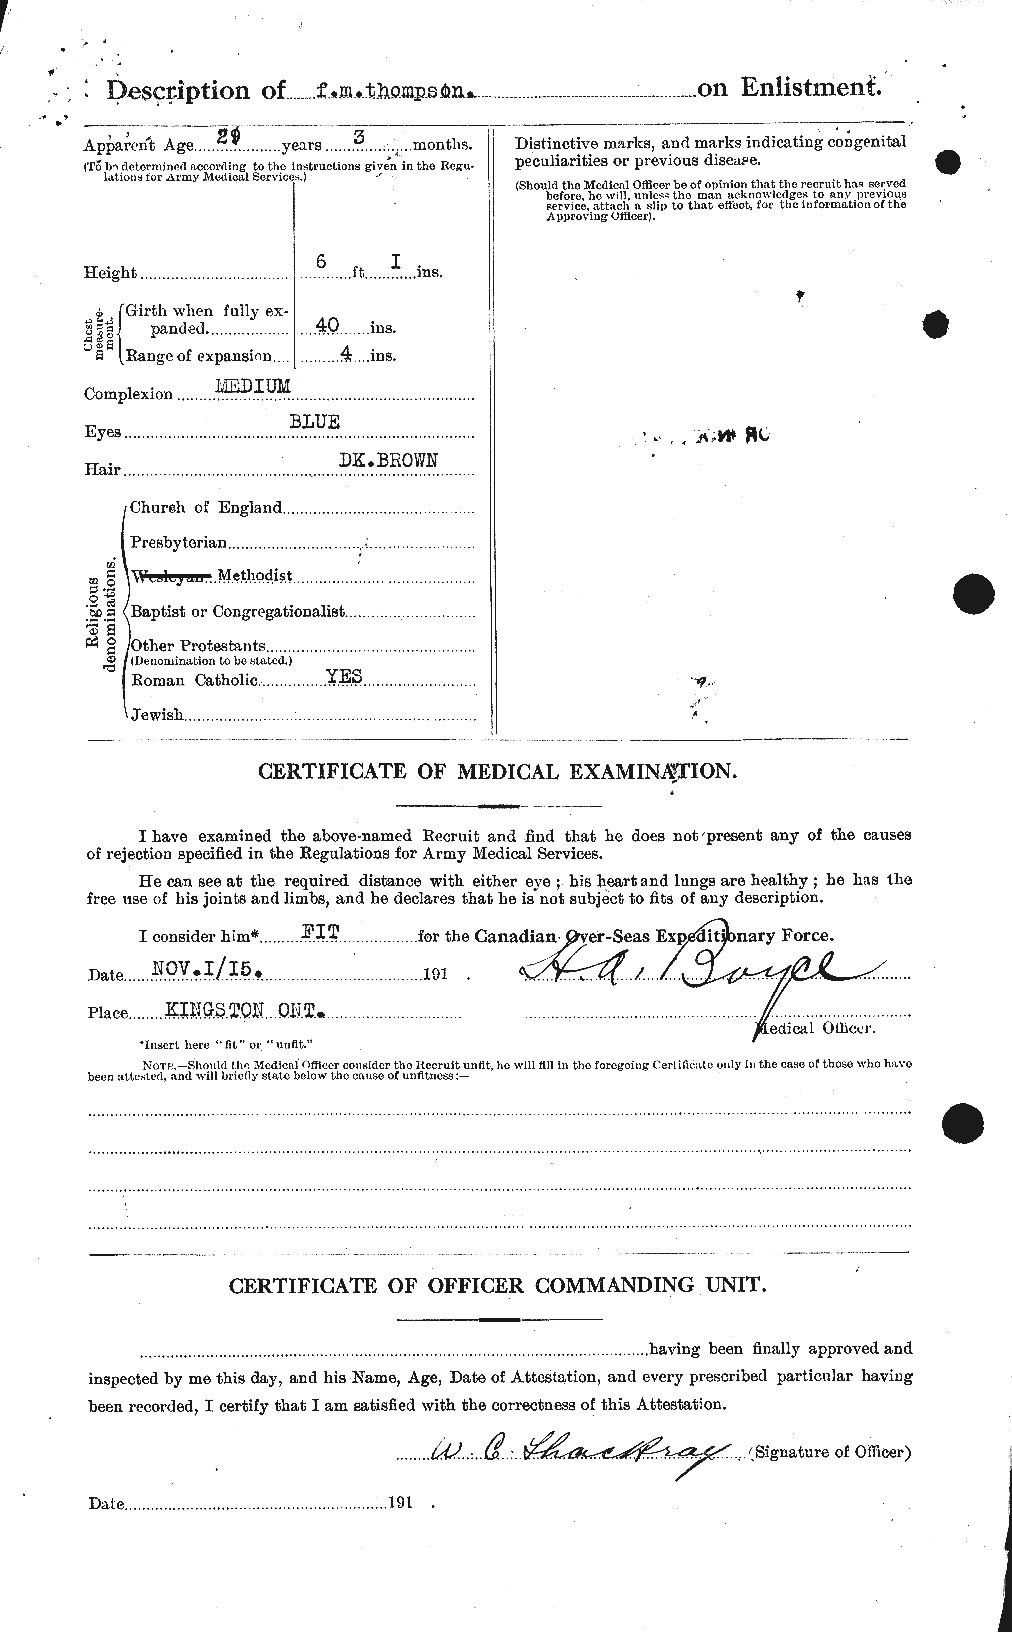 Personnel Records of the First World War - CEF 633682b